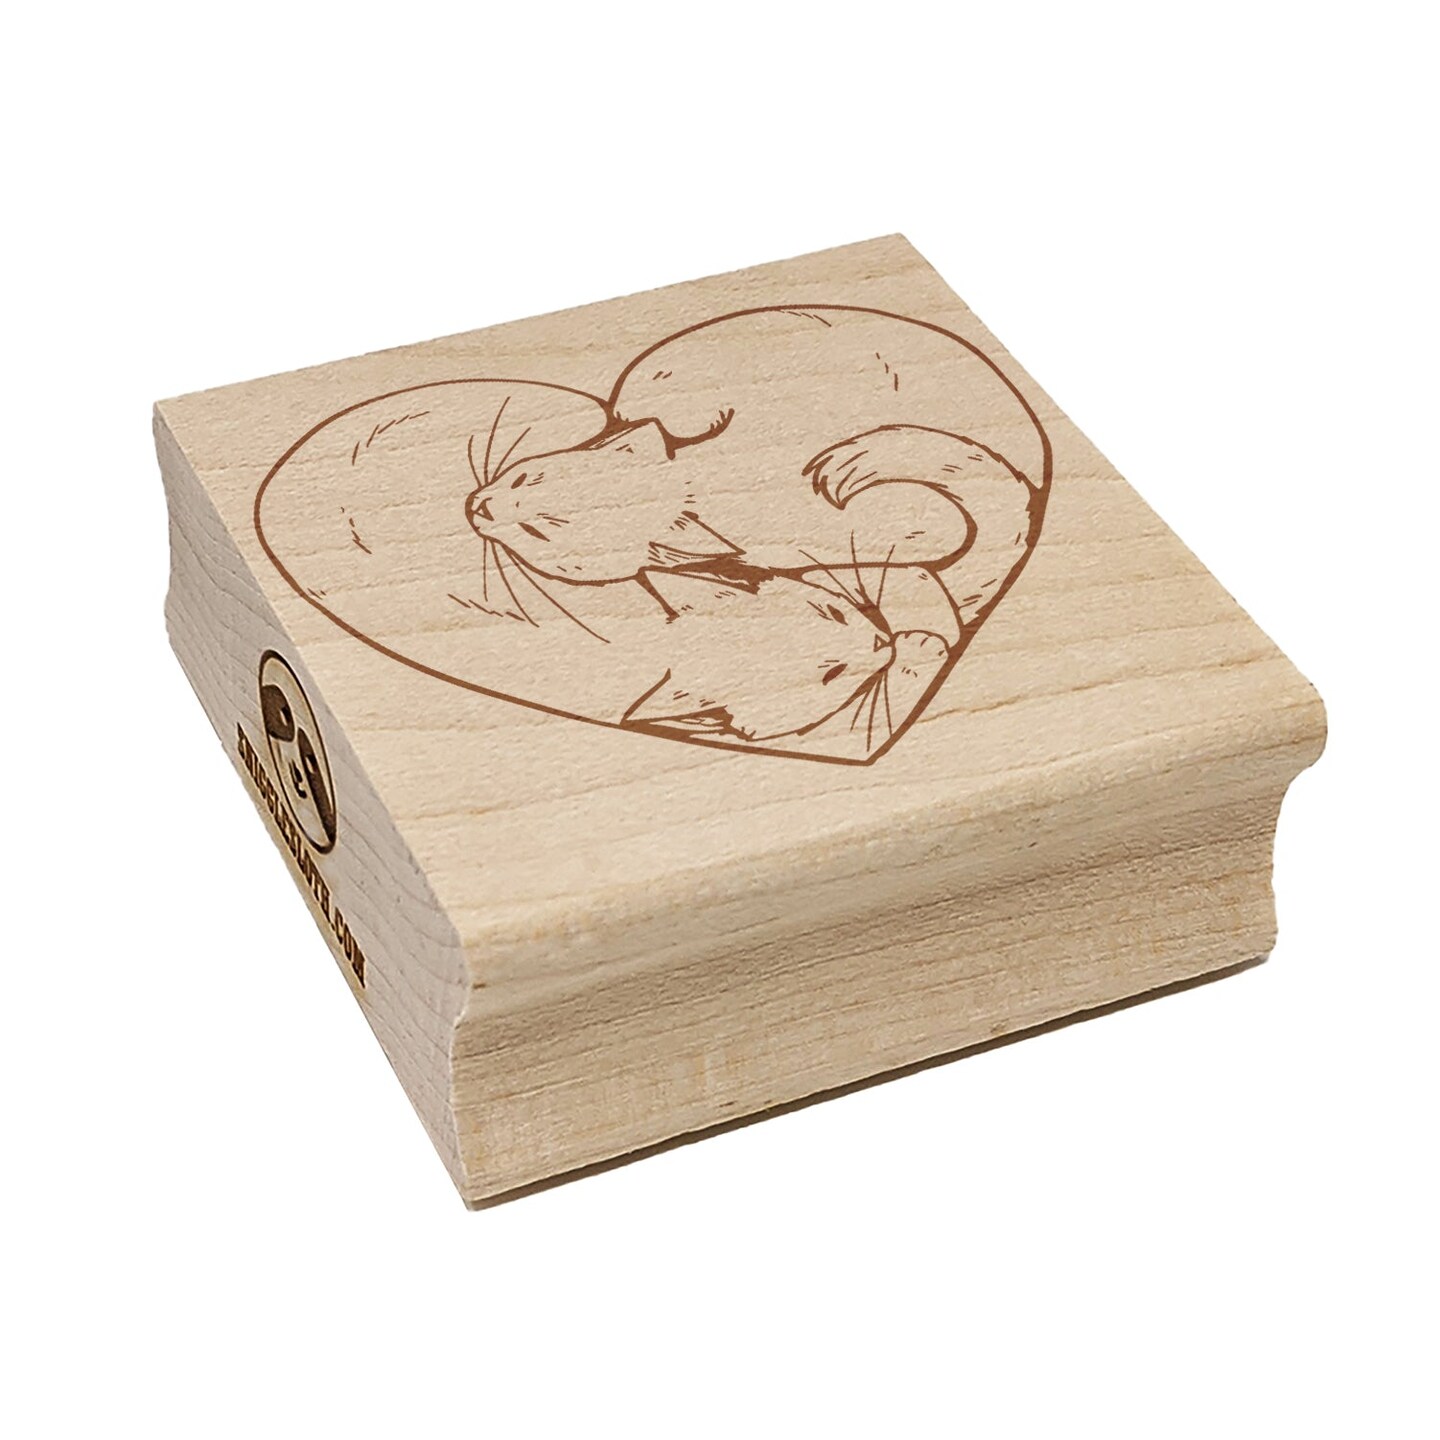 Pair of Sleeping Cats Heart Square Rubber Stamp for Stamping Crafting